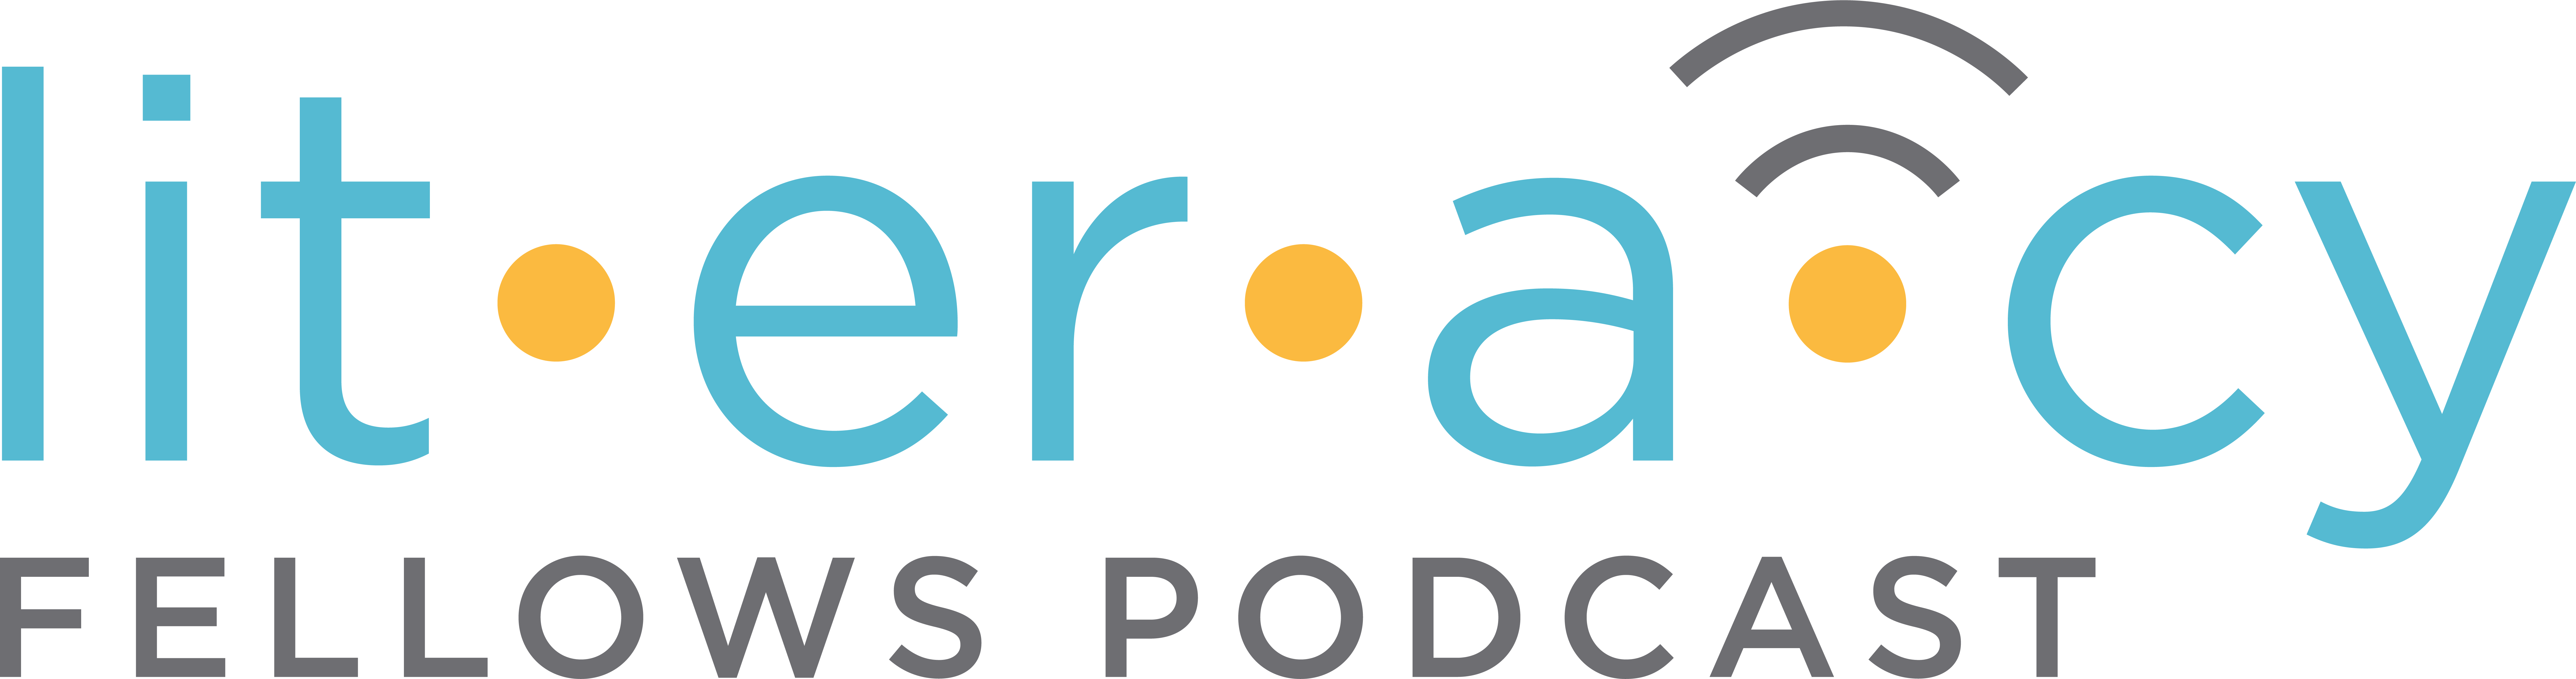 The Literacy Fellows Podcast